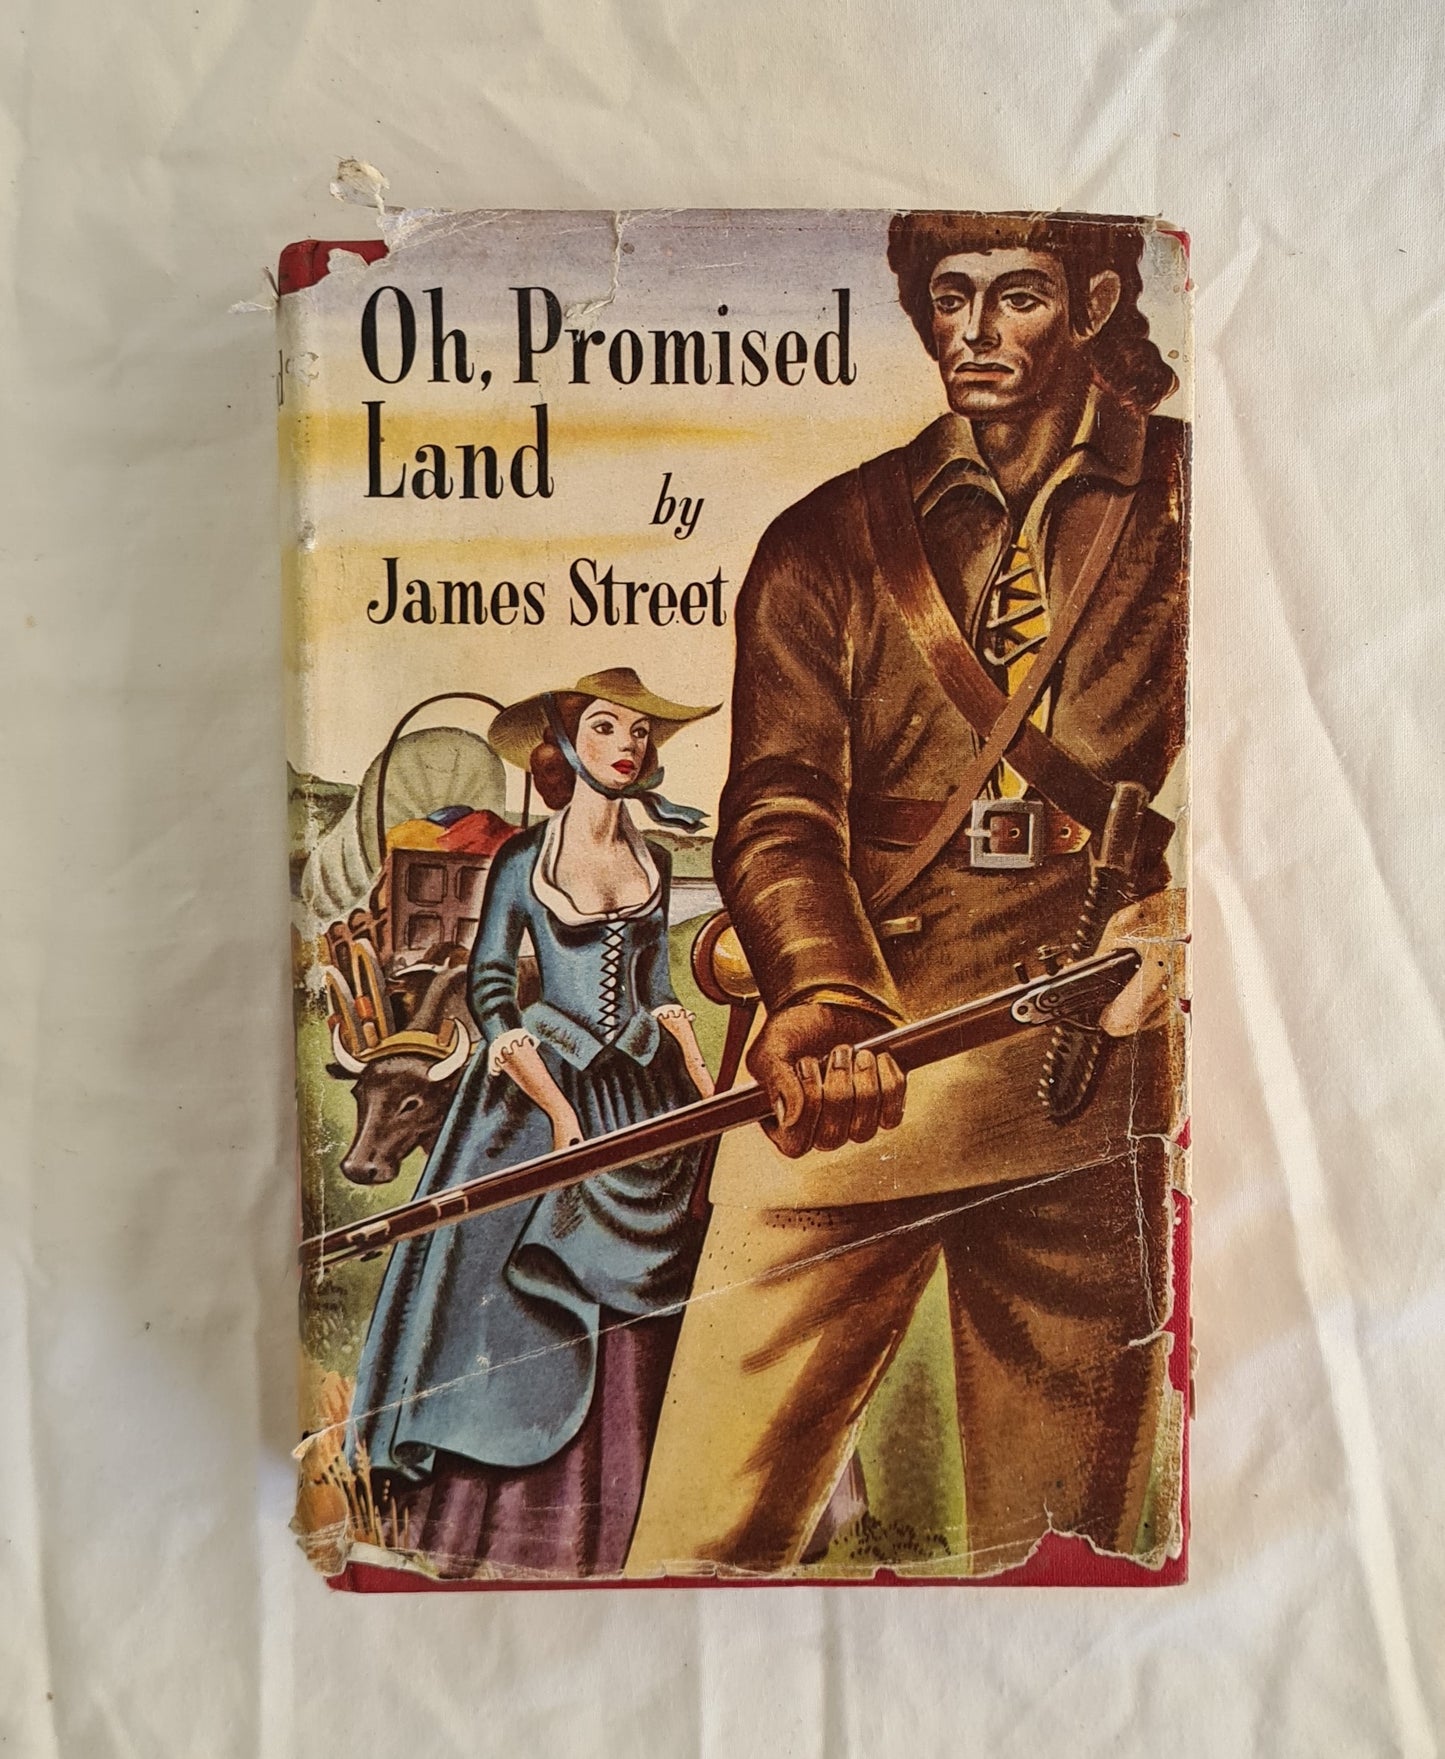 Oh, Promised Land by James Street